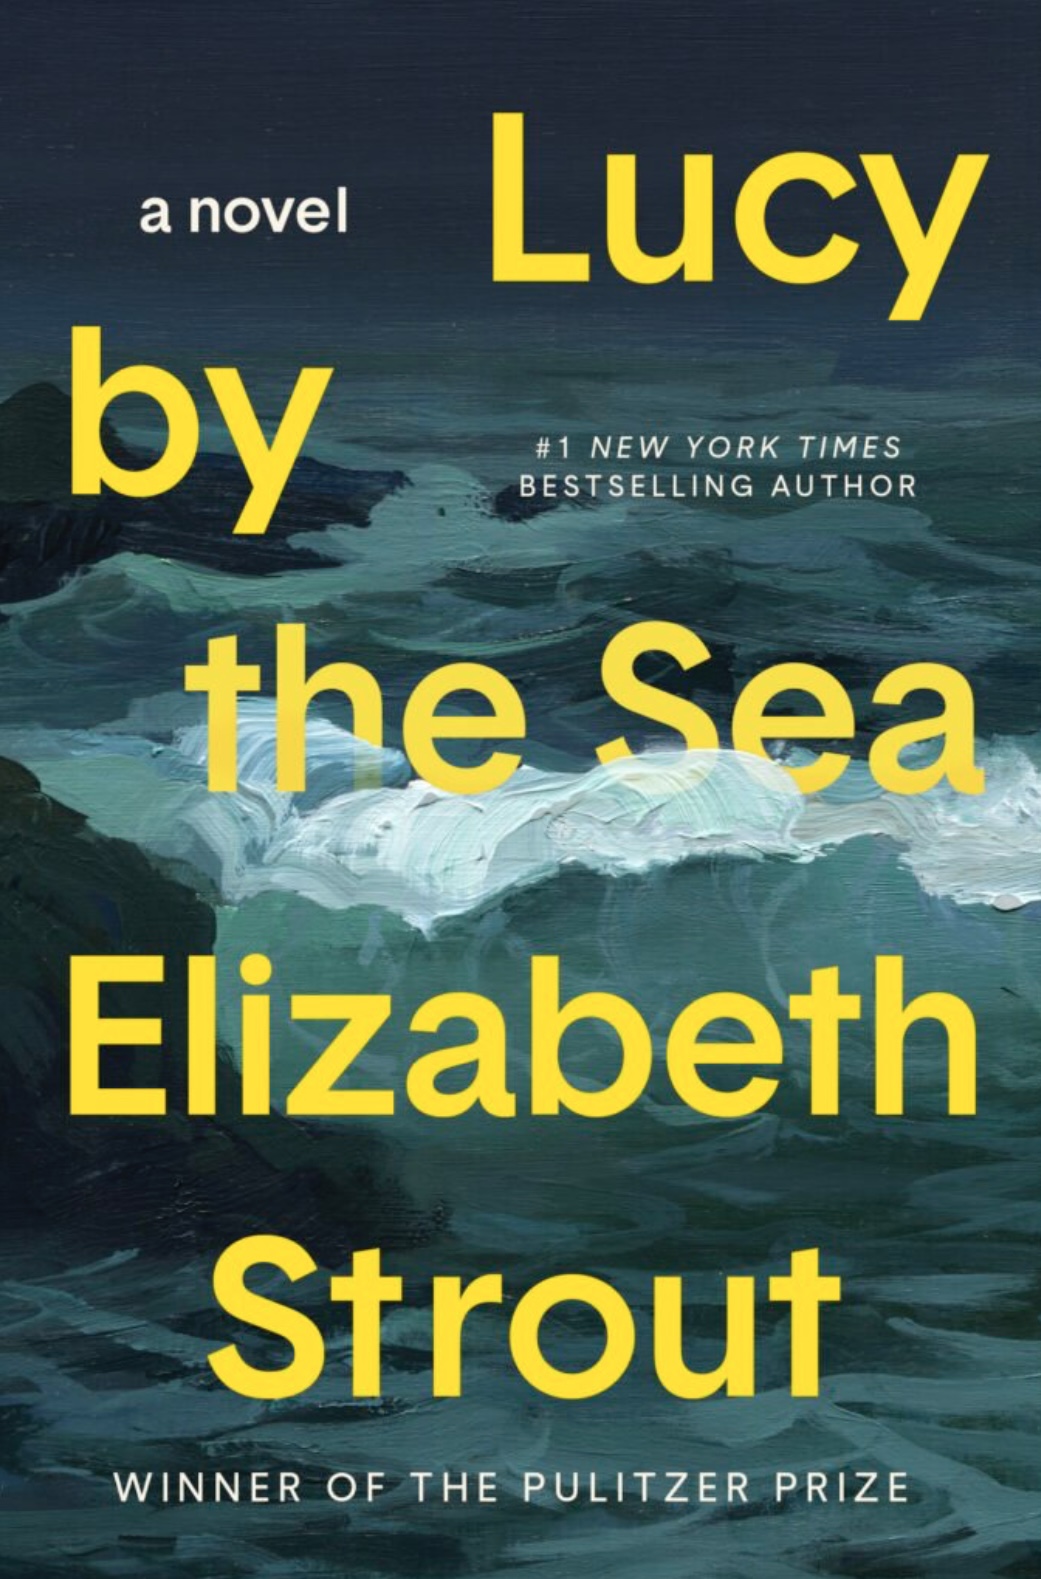 Lucy by the Sean By Elizabeth Strout book cover.